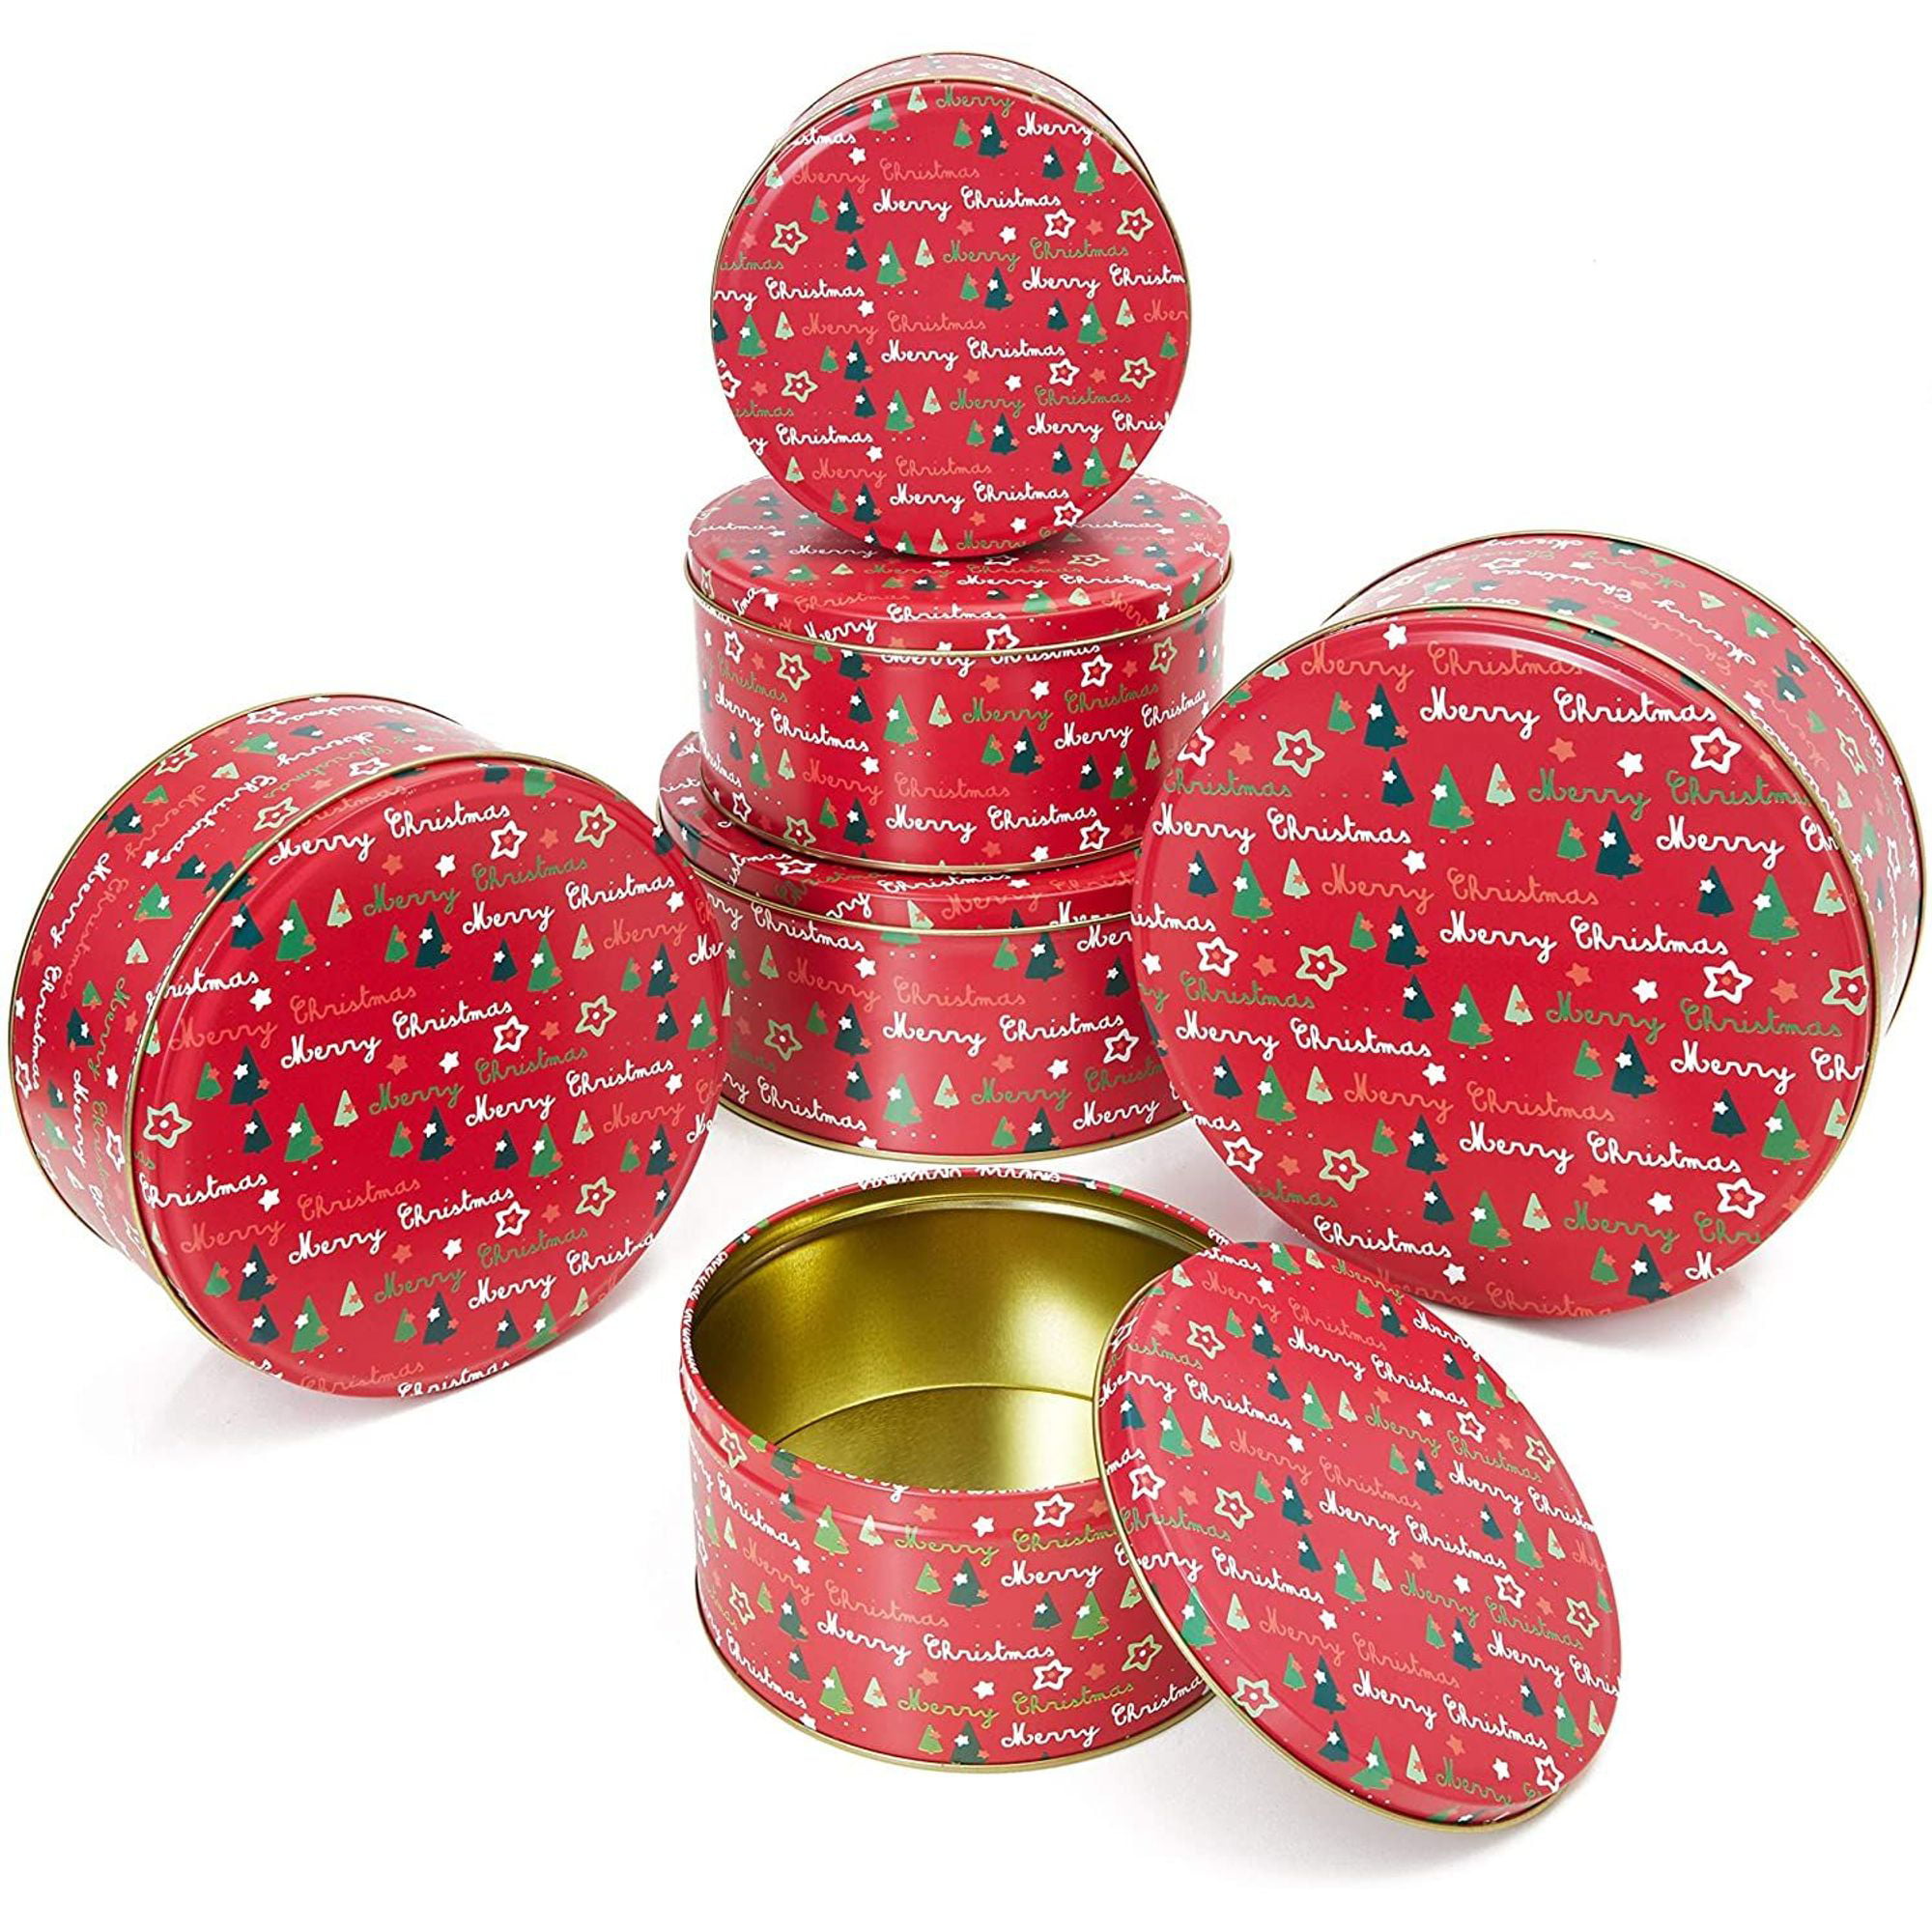 Download 6 Pack Christmas Empty Metal Cookie Nesting Tins Box Set Round Storage Containers For Cookie Candy Gift Red 3 Sizes Walmart Com Walmart Com